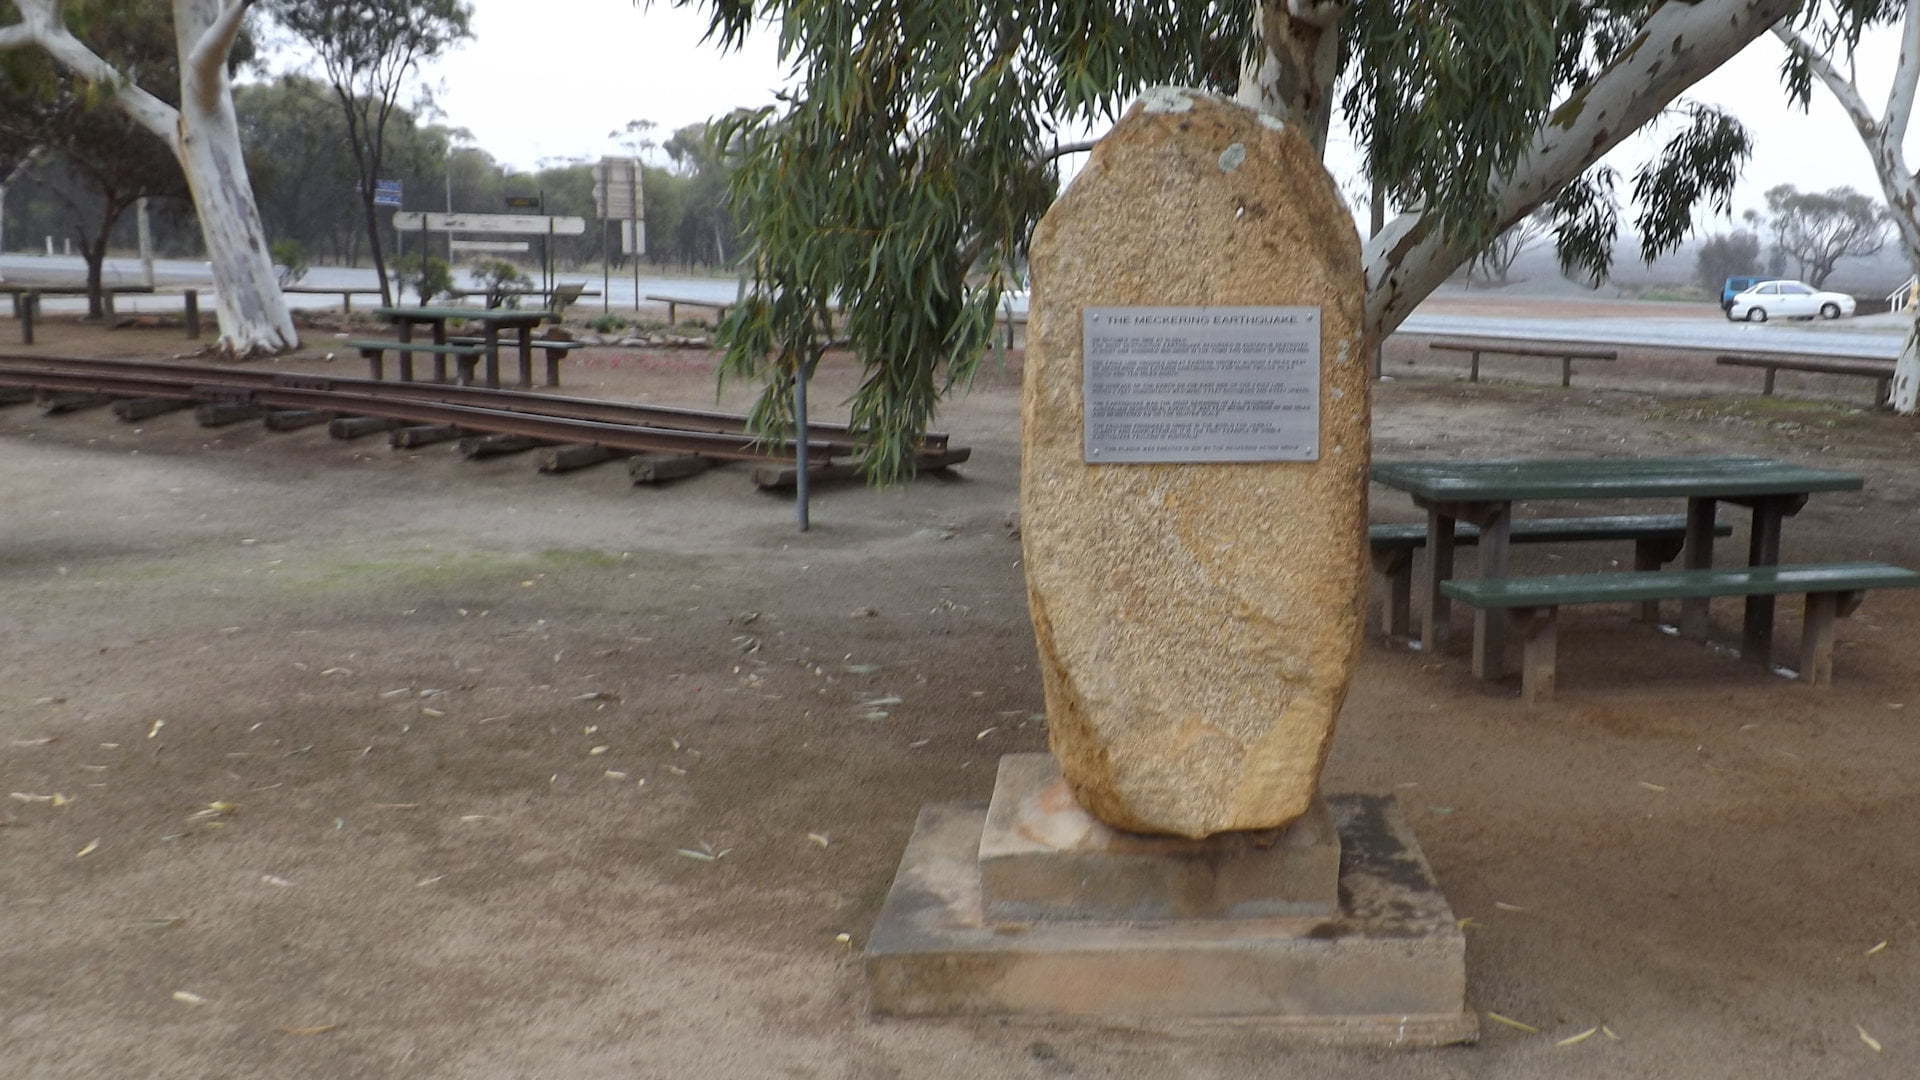 Monument at the Meckering Earthquake Display, bent railway line behind it